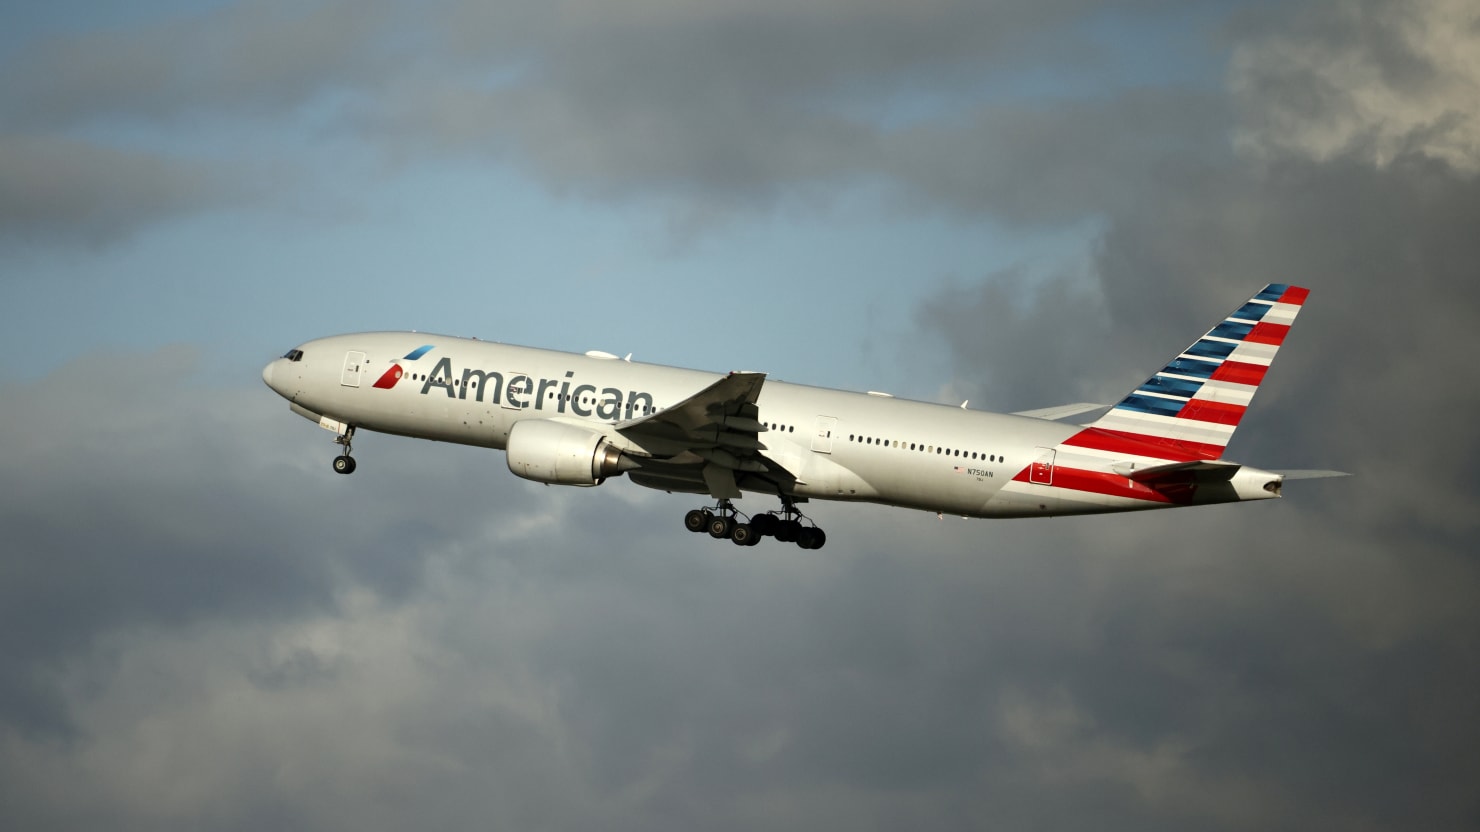 American Airlines Pilot in Hot Water Over ‘Let’s Go Brandon’ Luggage Sticker